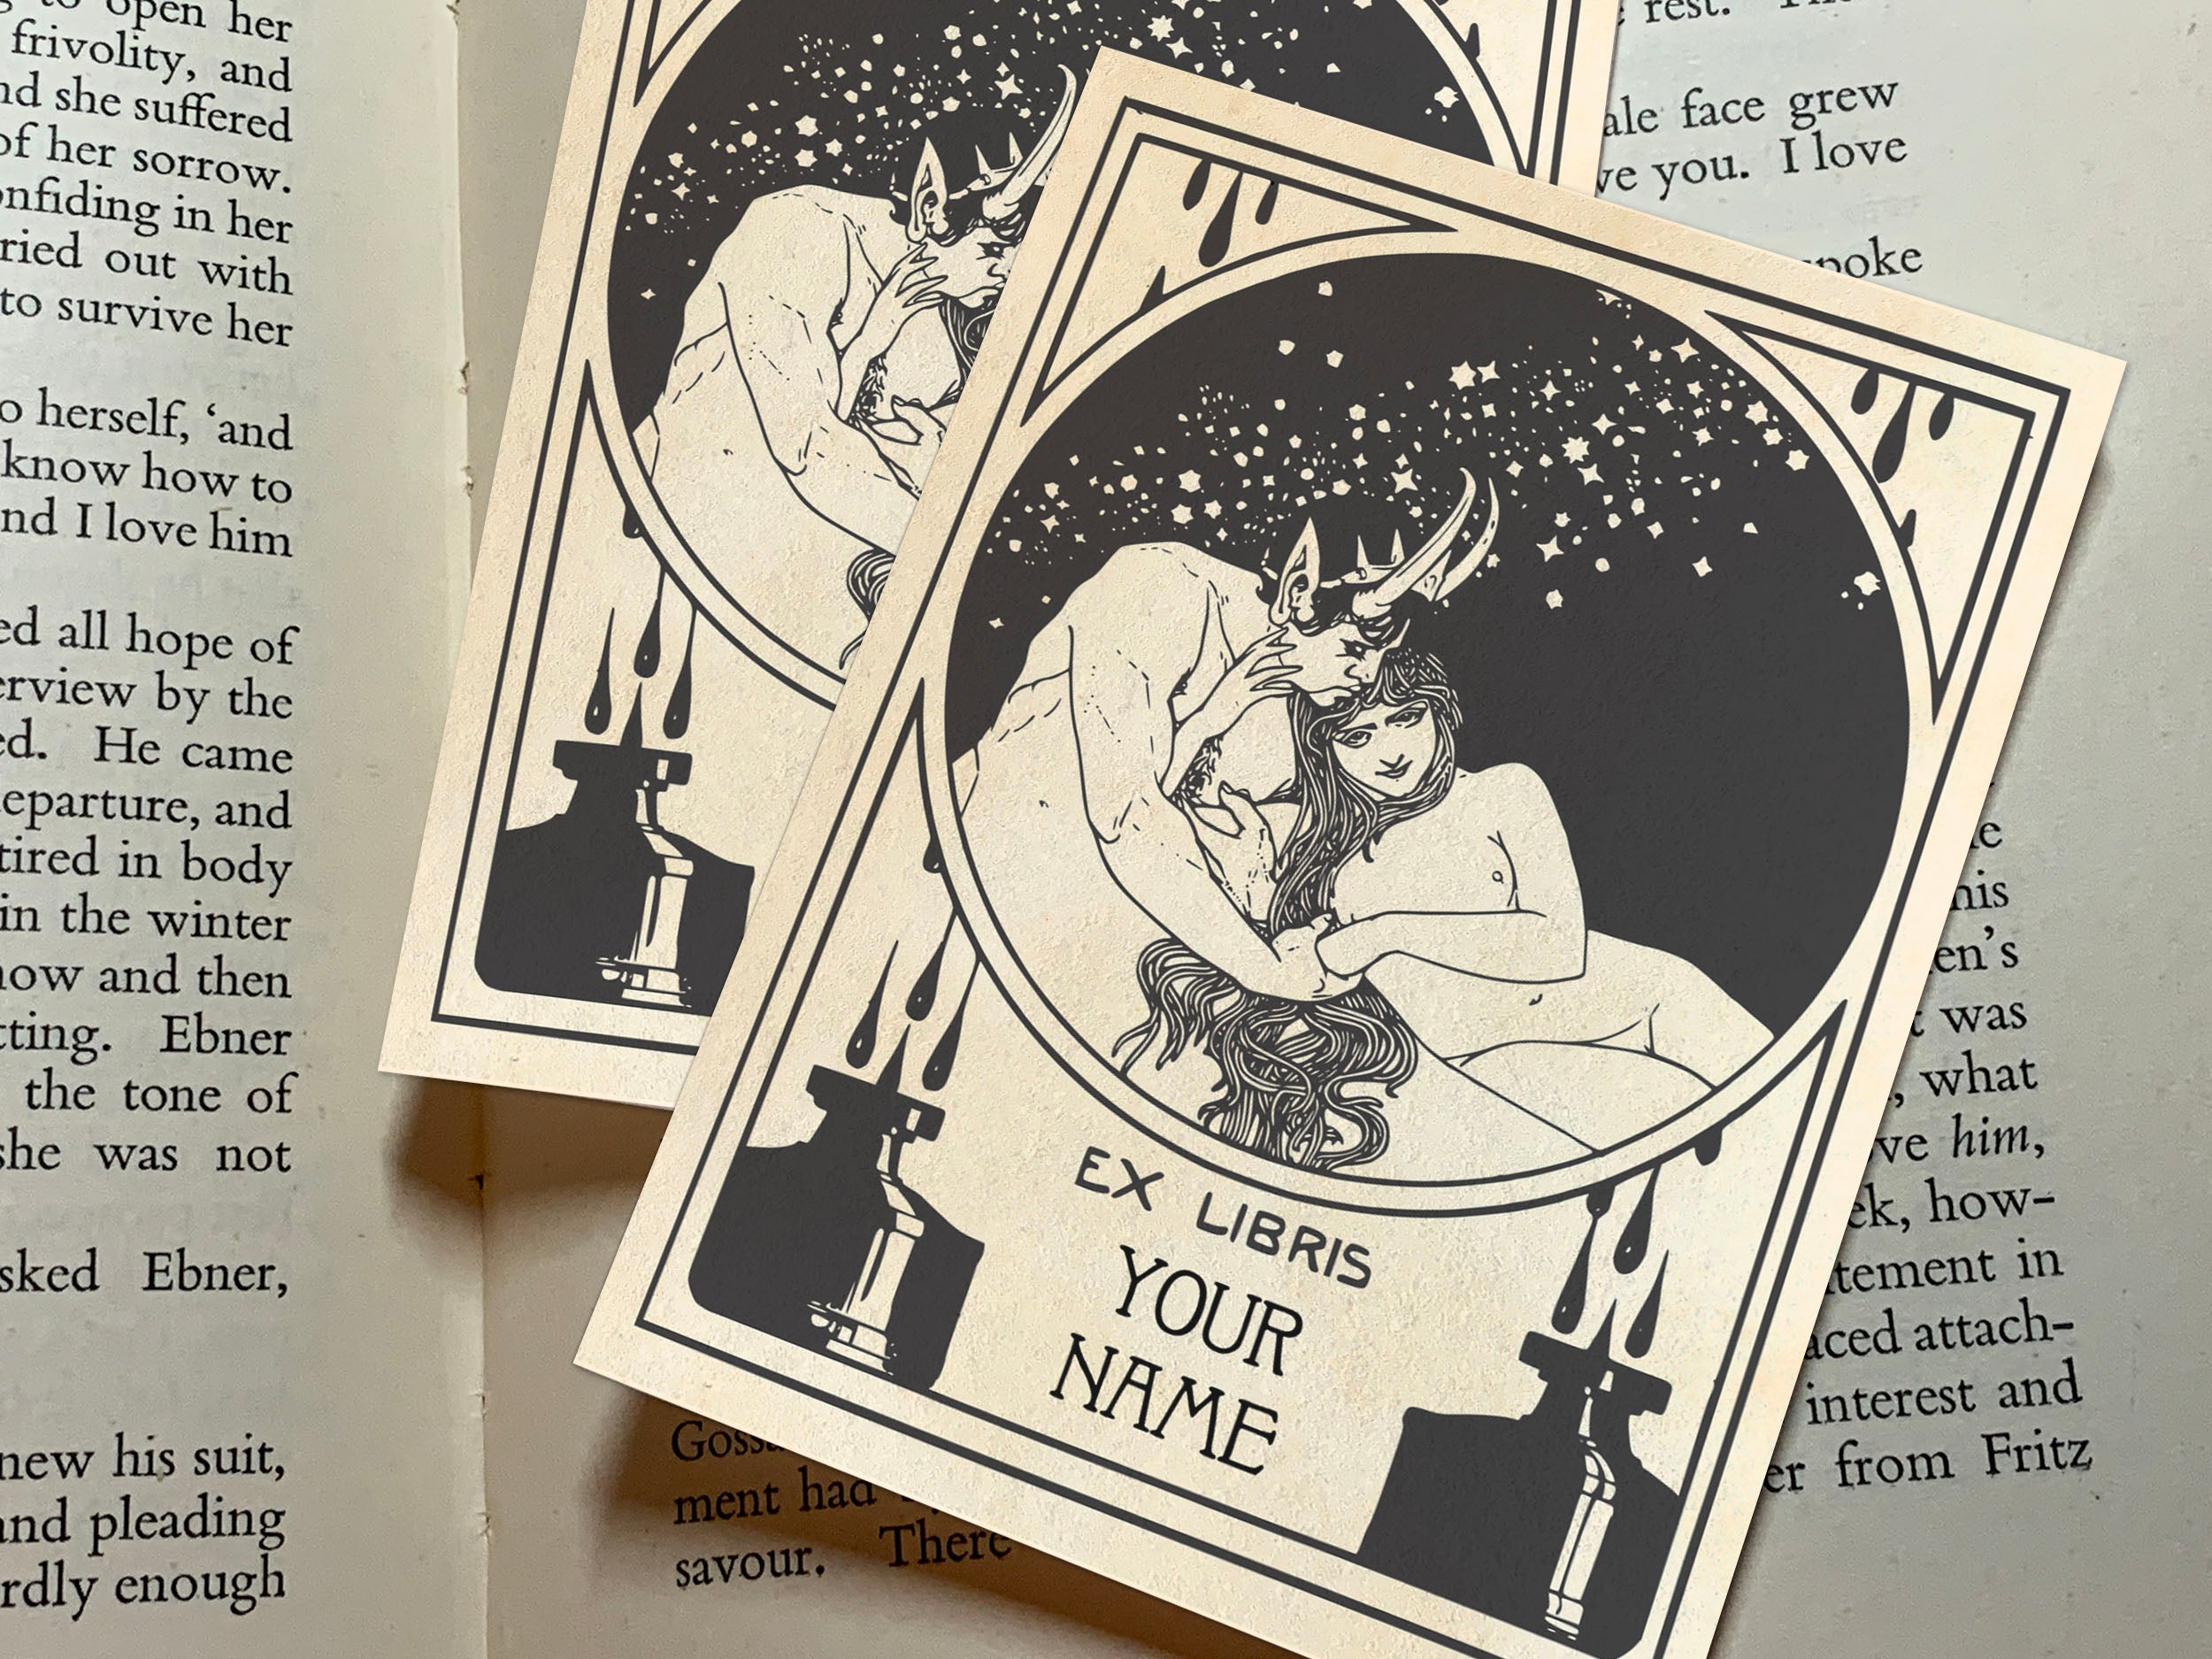 Satyr and Nymph, Personalized, Erotic Ex-Libris Bookplates, Crafted on Traditional Gummed Paper, 3in x 4in, Set of 30